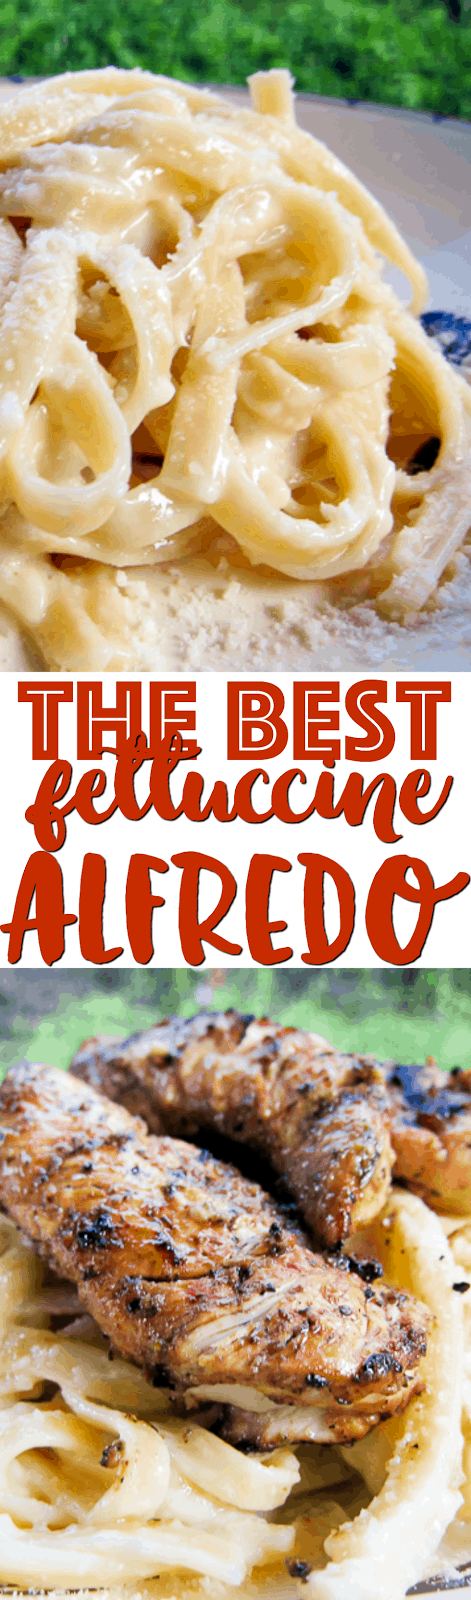 THE BEST Fettuccine Alfredo Sauce Recipe - only 3 ingredients!! Top with grilled chicken for an amazing meal! Ready in minutes!! Better than any restaurant!! A great easy weeknight recipe!